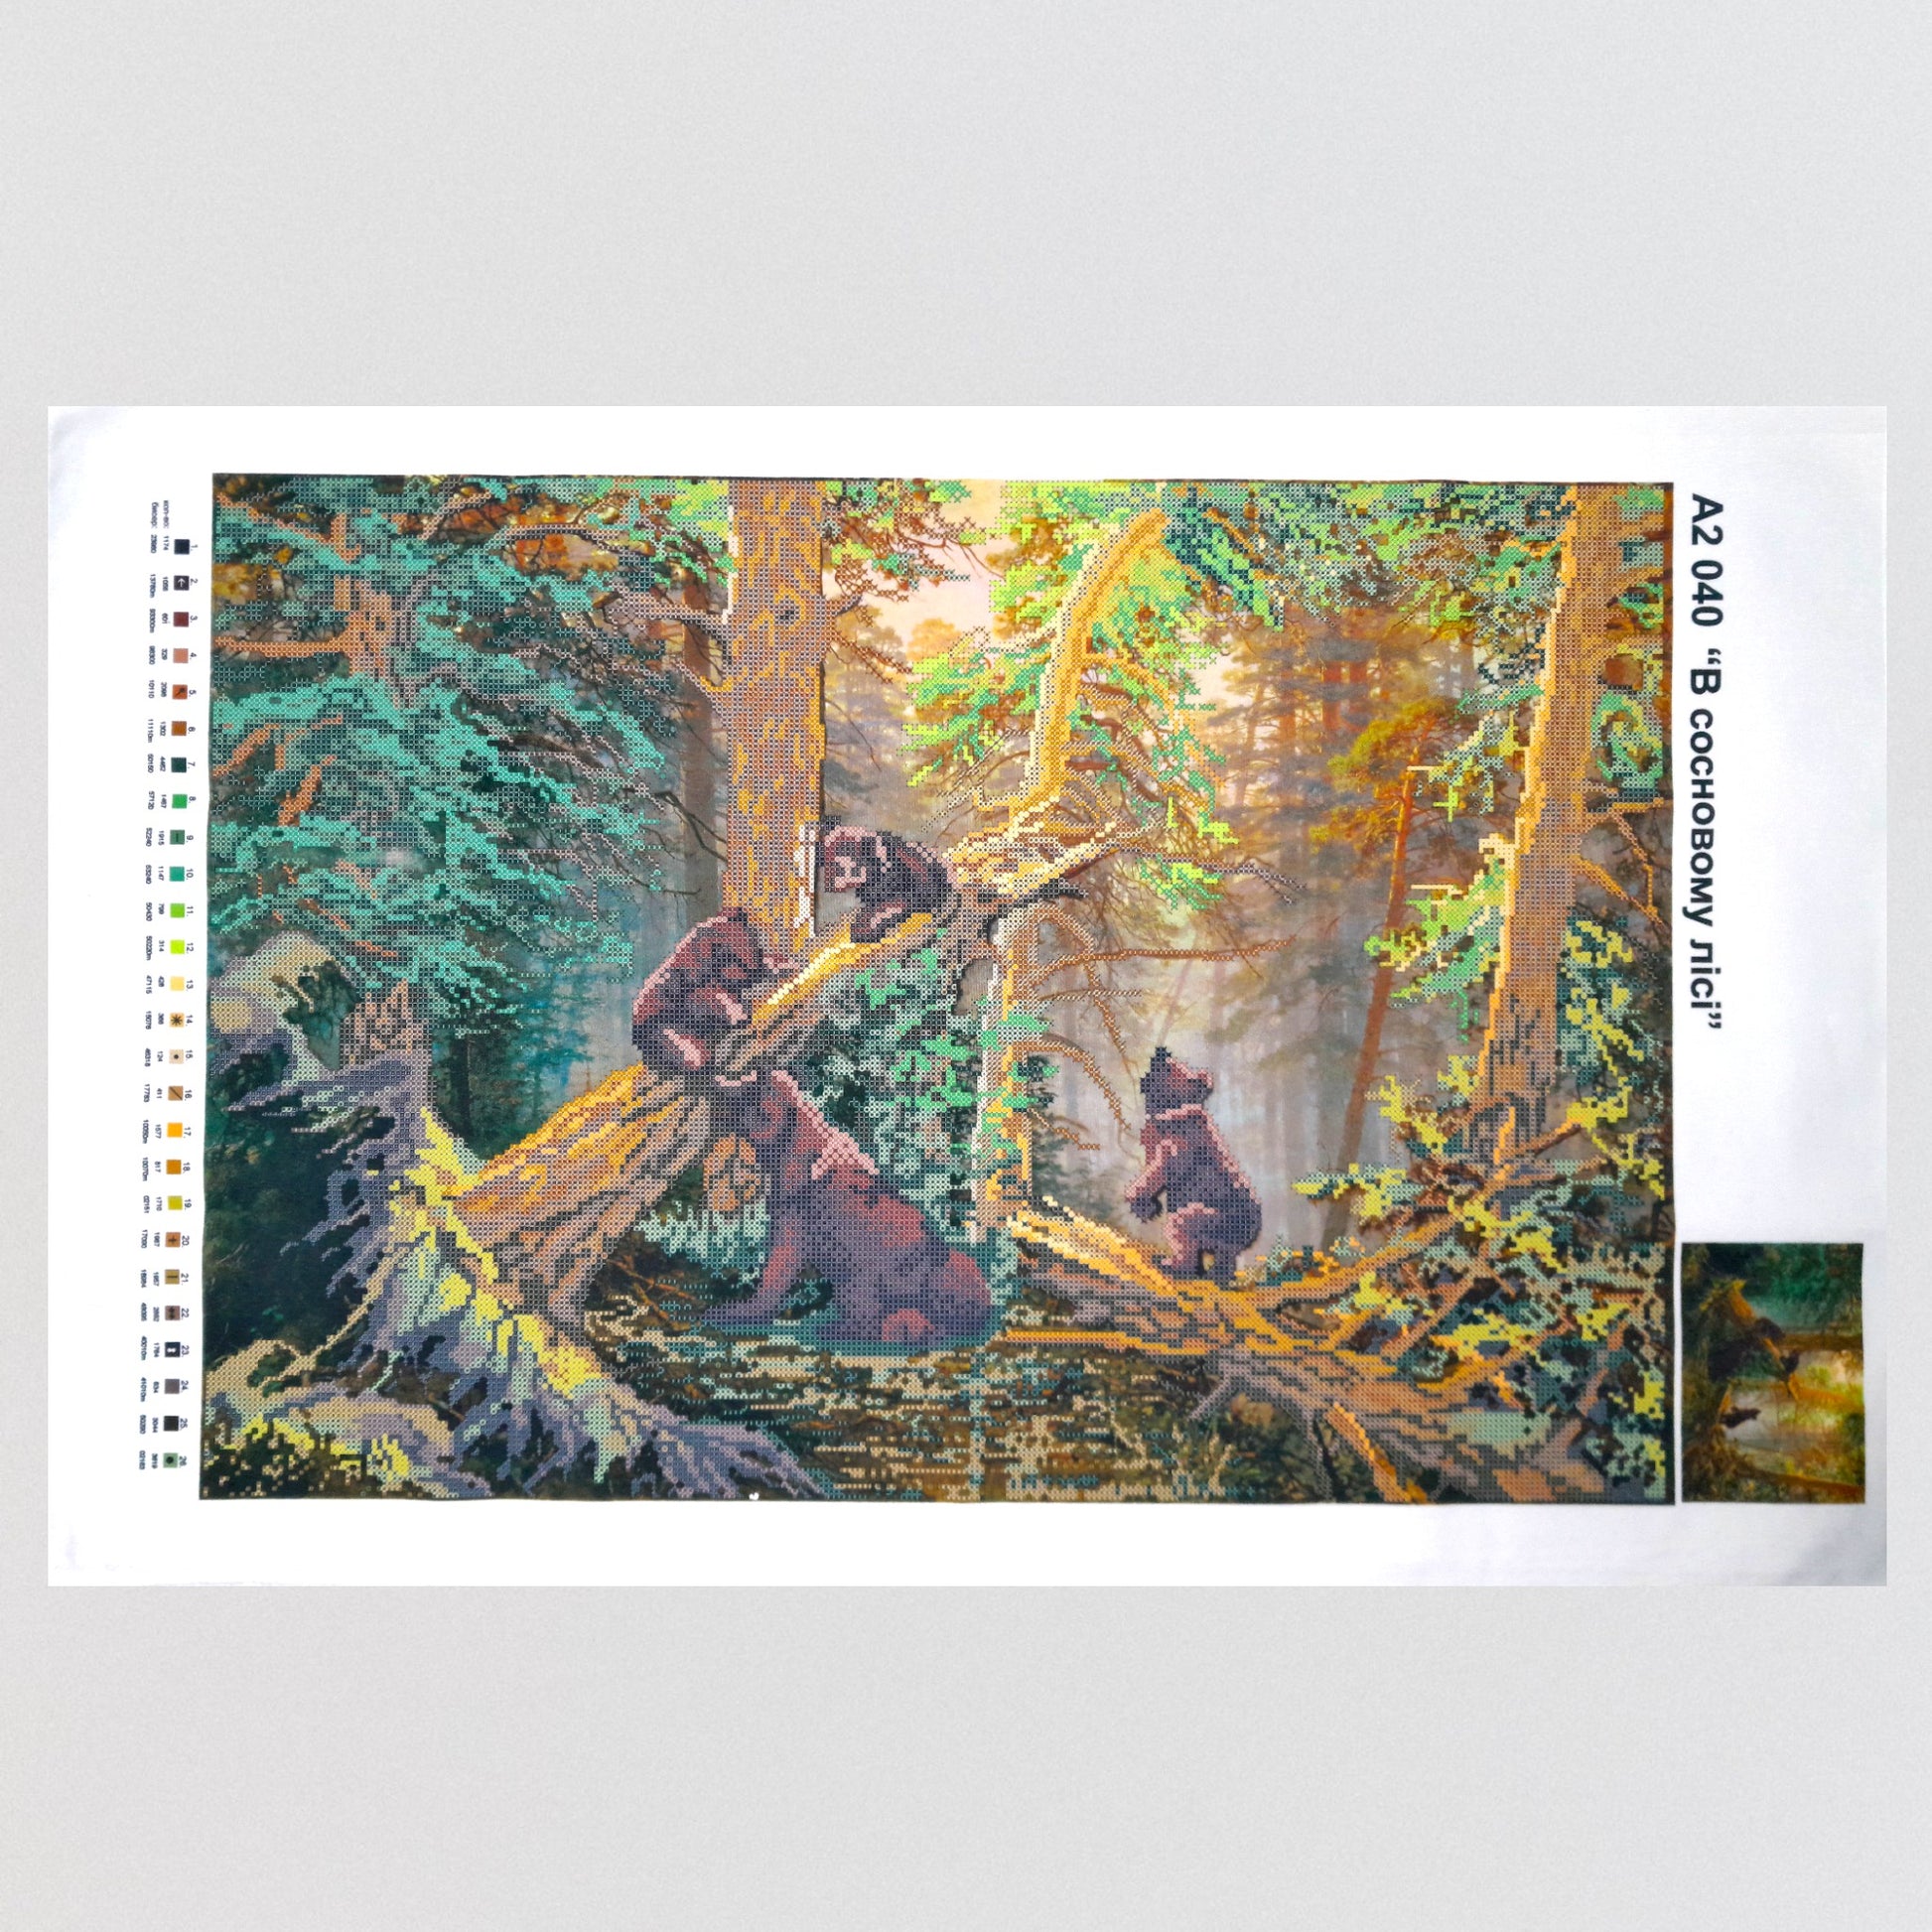 DIY Bead embroidery kit. "Morning in the forest". Size: 23.6-16.1" (60-41cm) - VadymShop